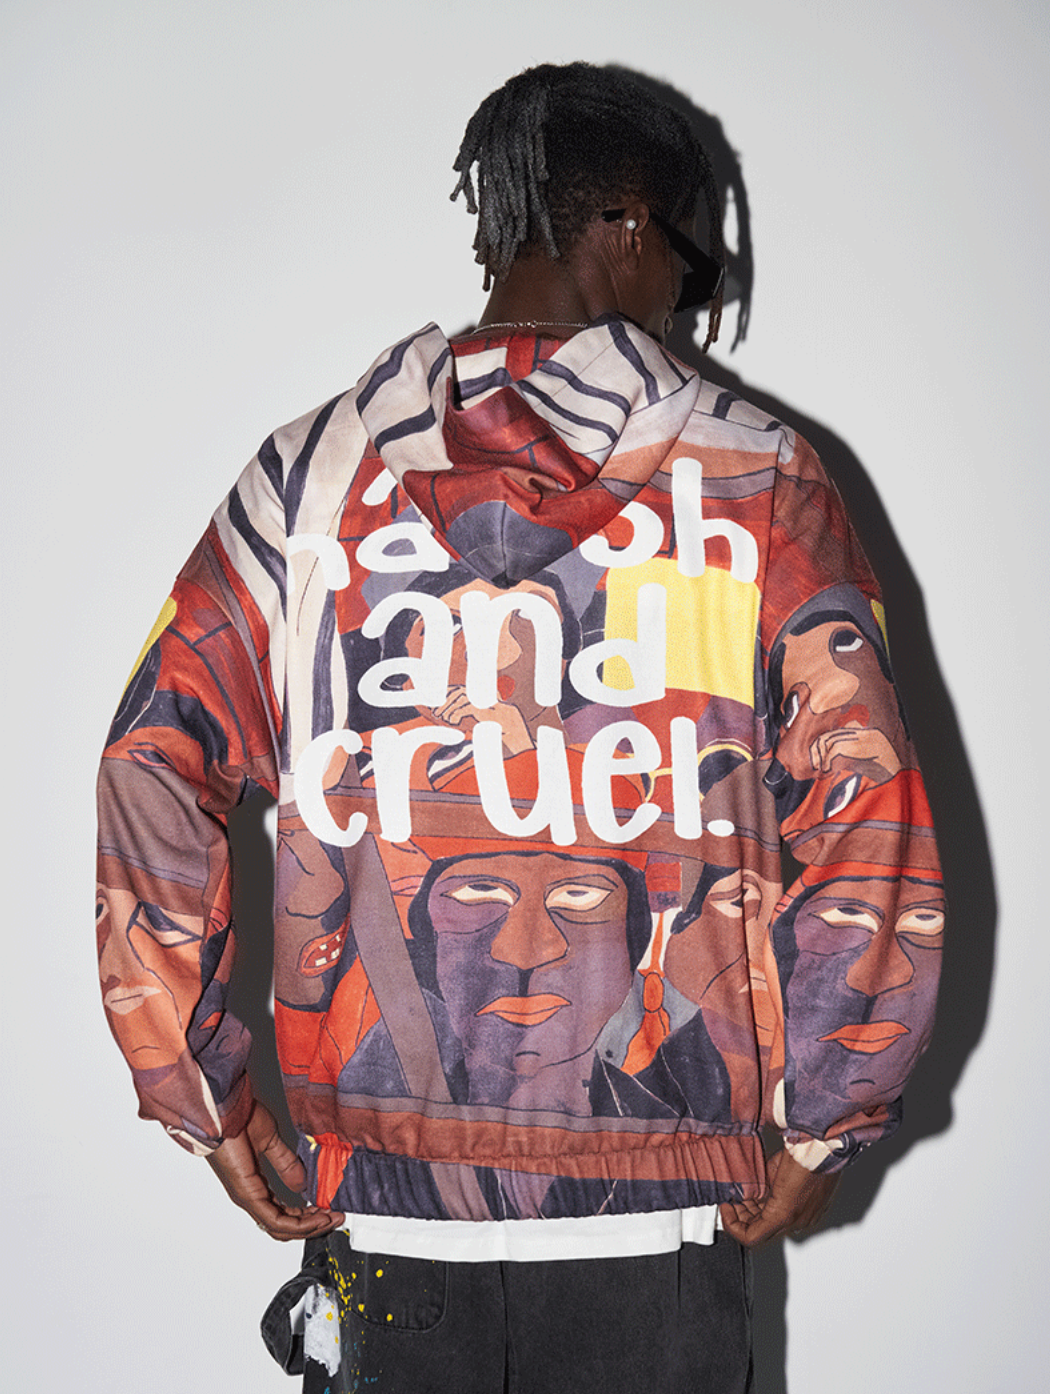 Harsh and Cruel Abstract Paint Full Print Hoodie